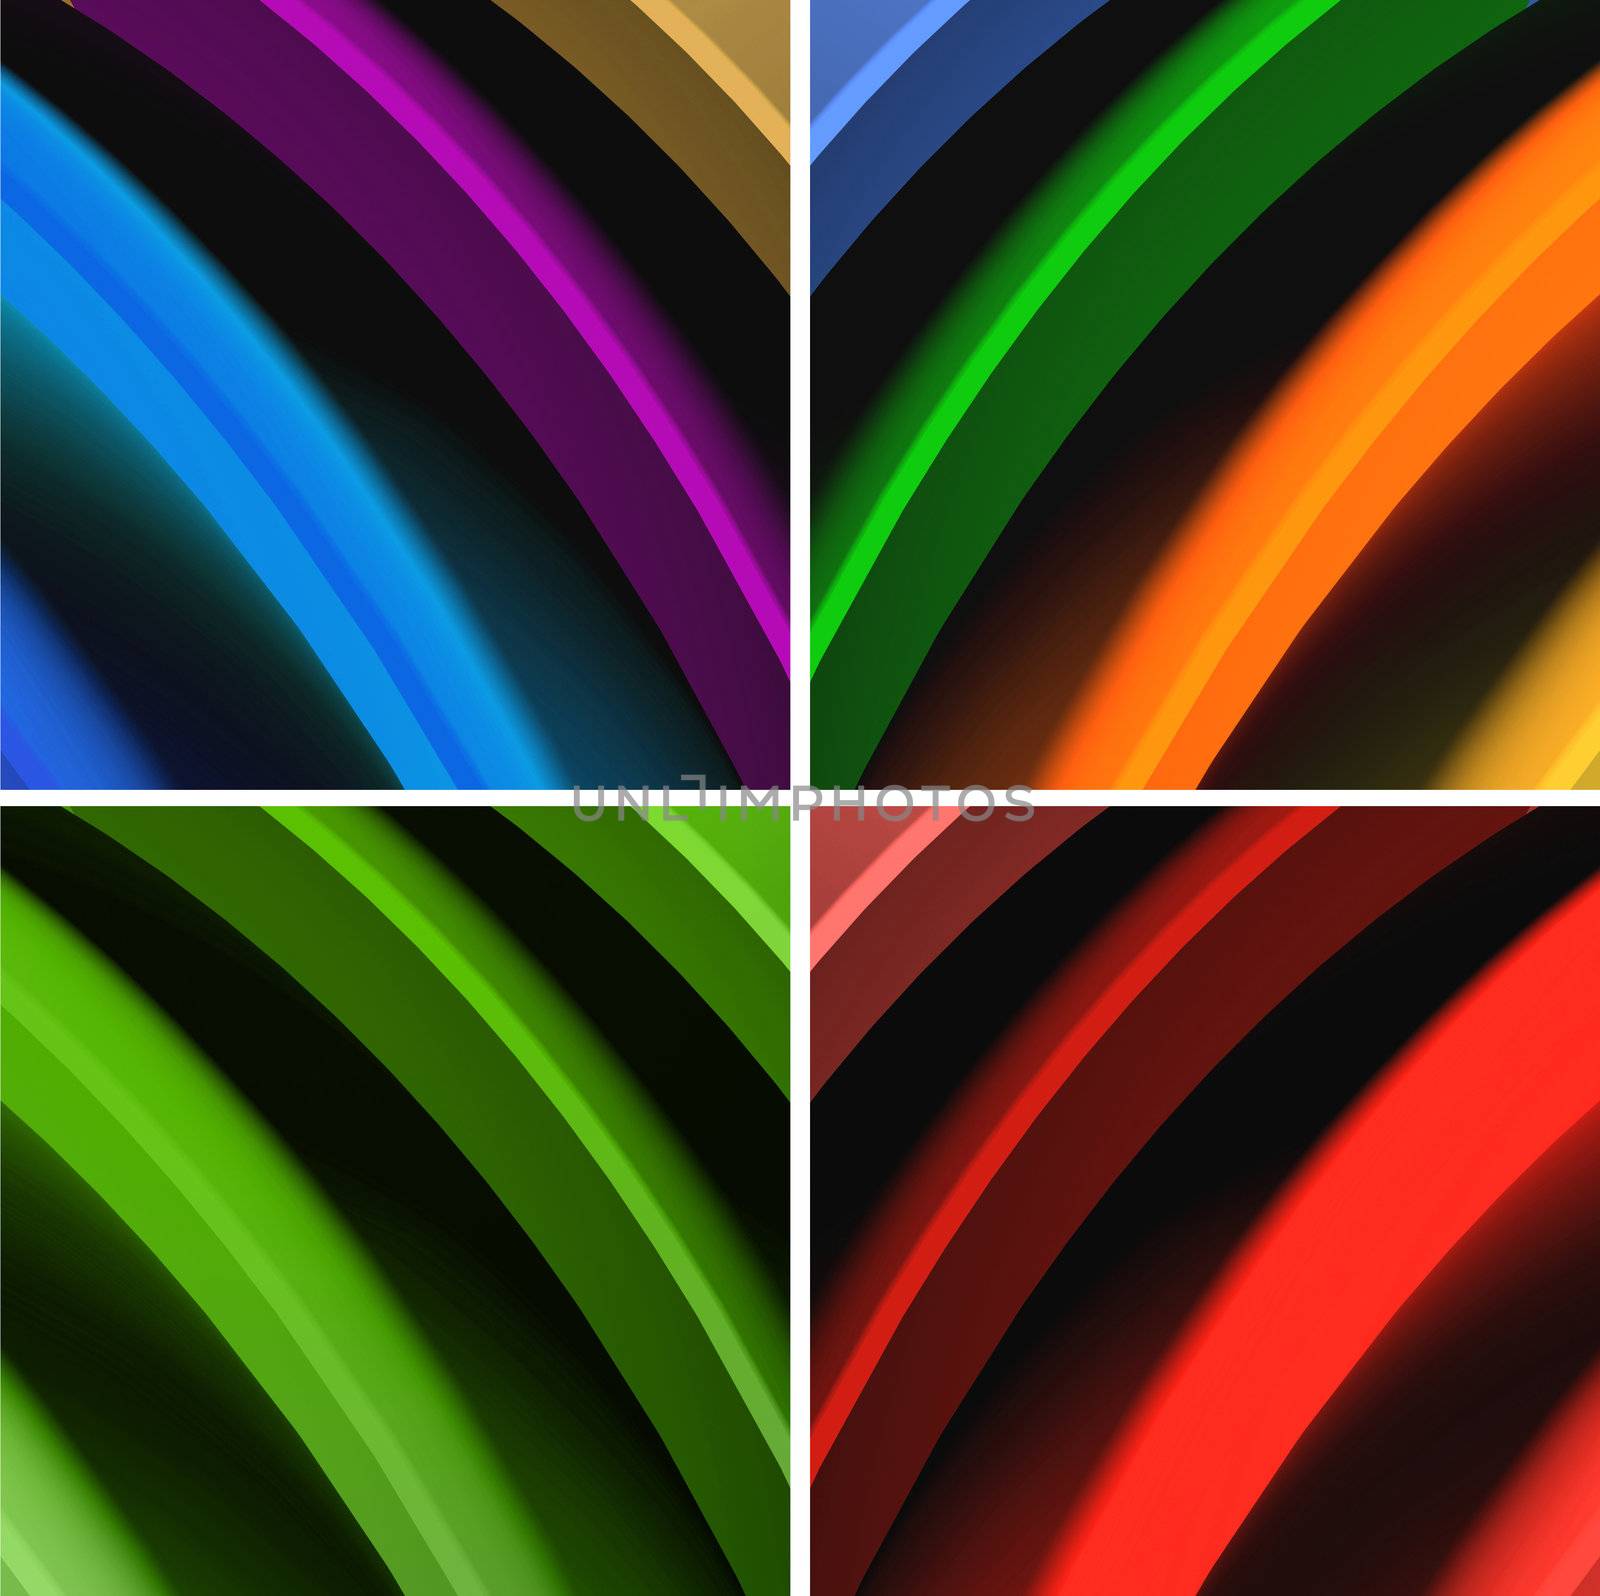 Multicolored 3d render waves abstract background.